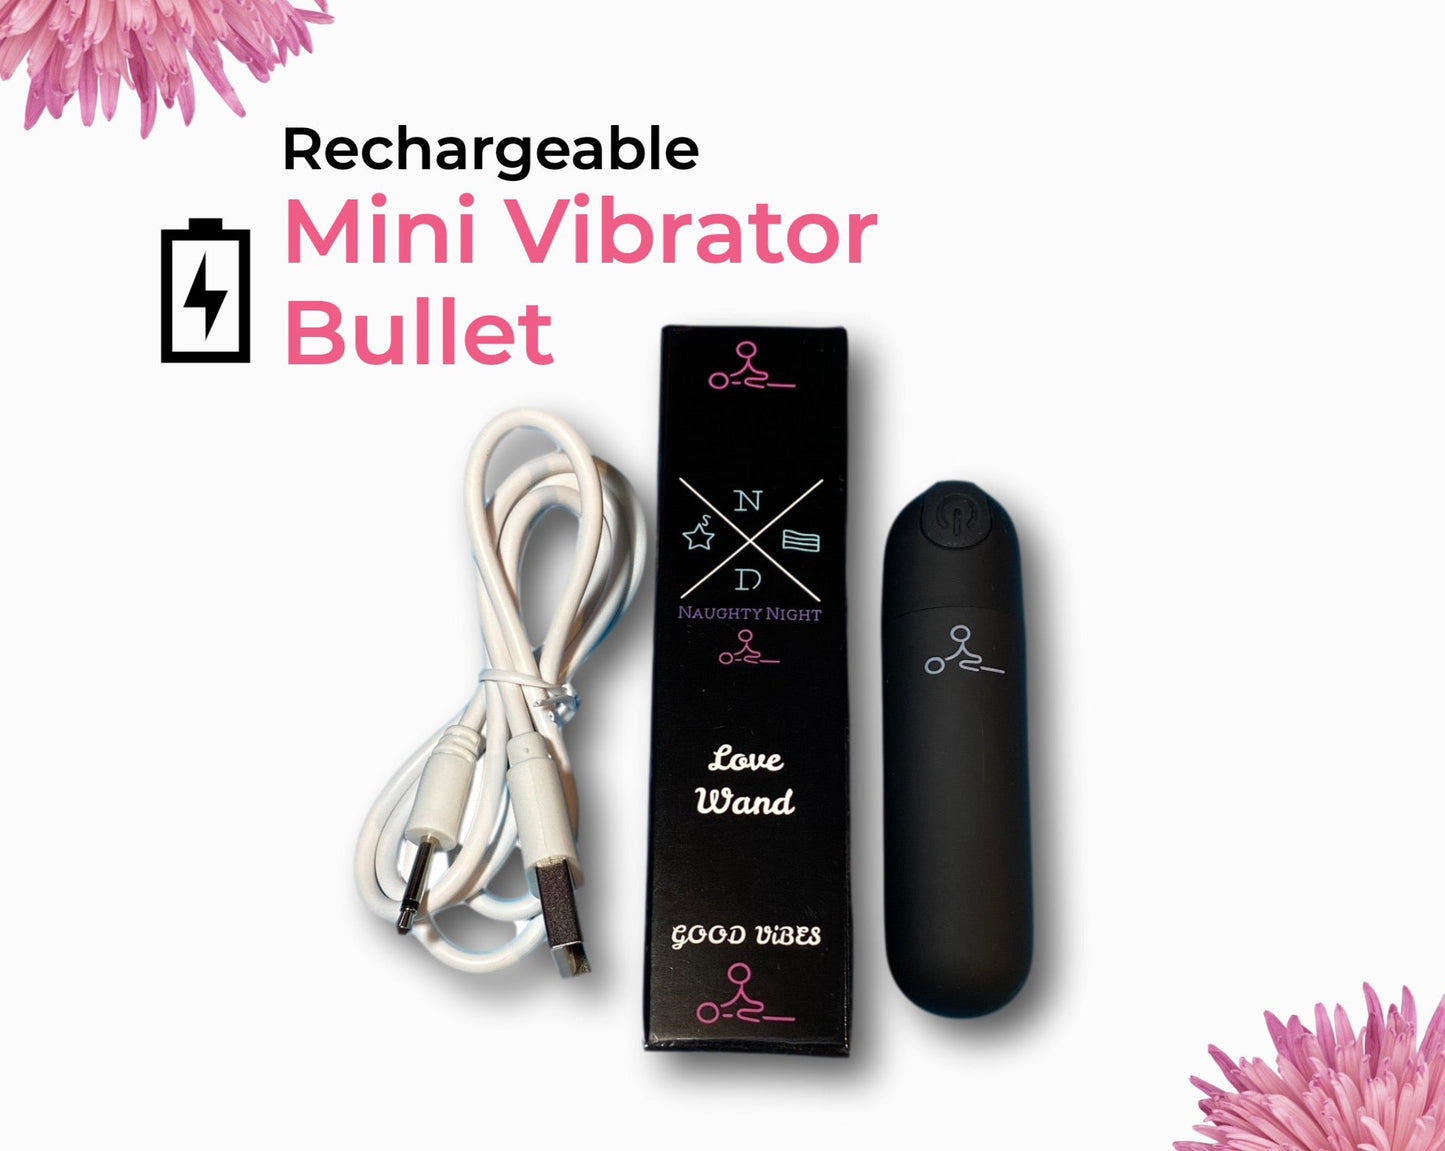 Bullet Rechargeable Vibrator - 10 Intense Speed Modes